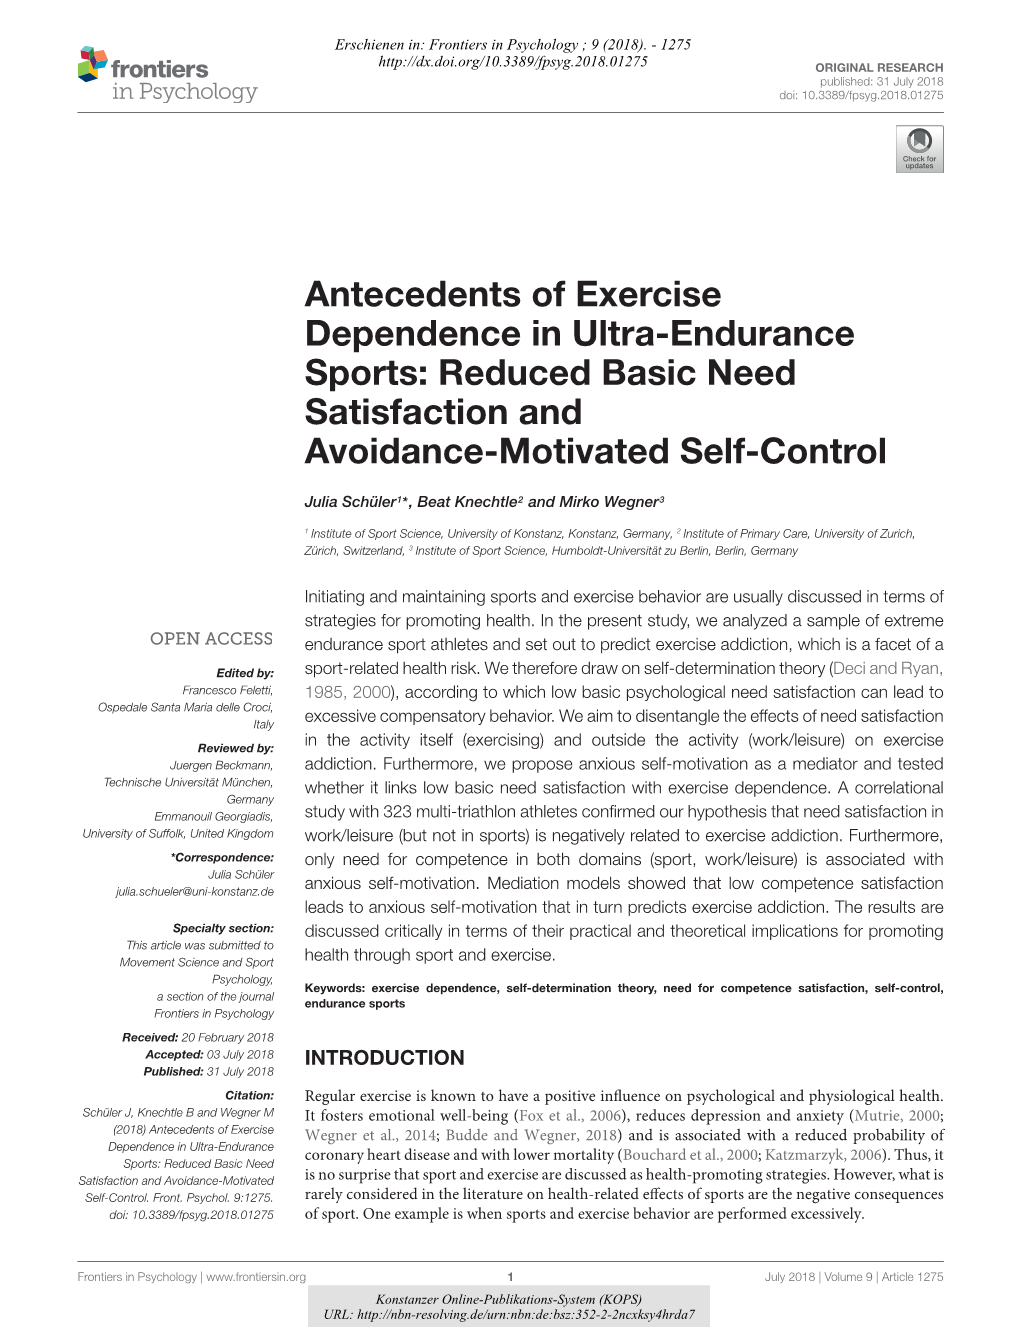 Antecedents of Exercise Dependence in Ultra-Endurance Sports: Reduced Basic Need Satisfaction and Avoidance-Motivated Self-Control